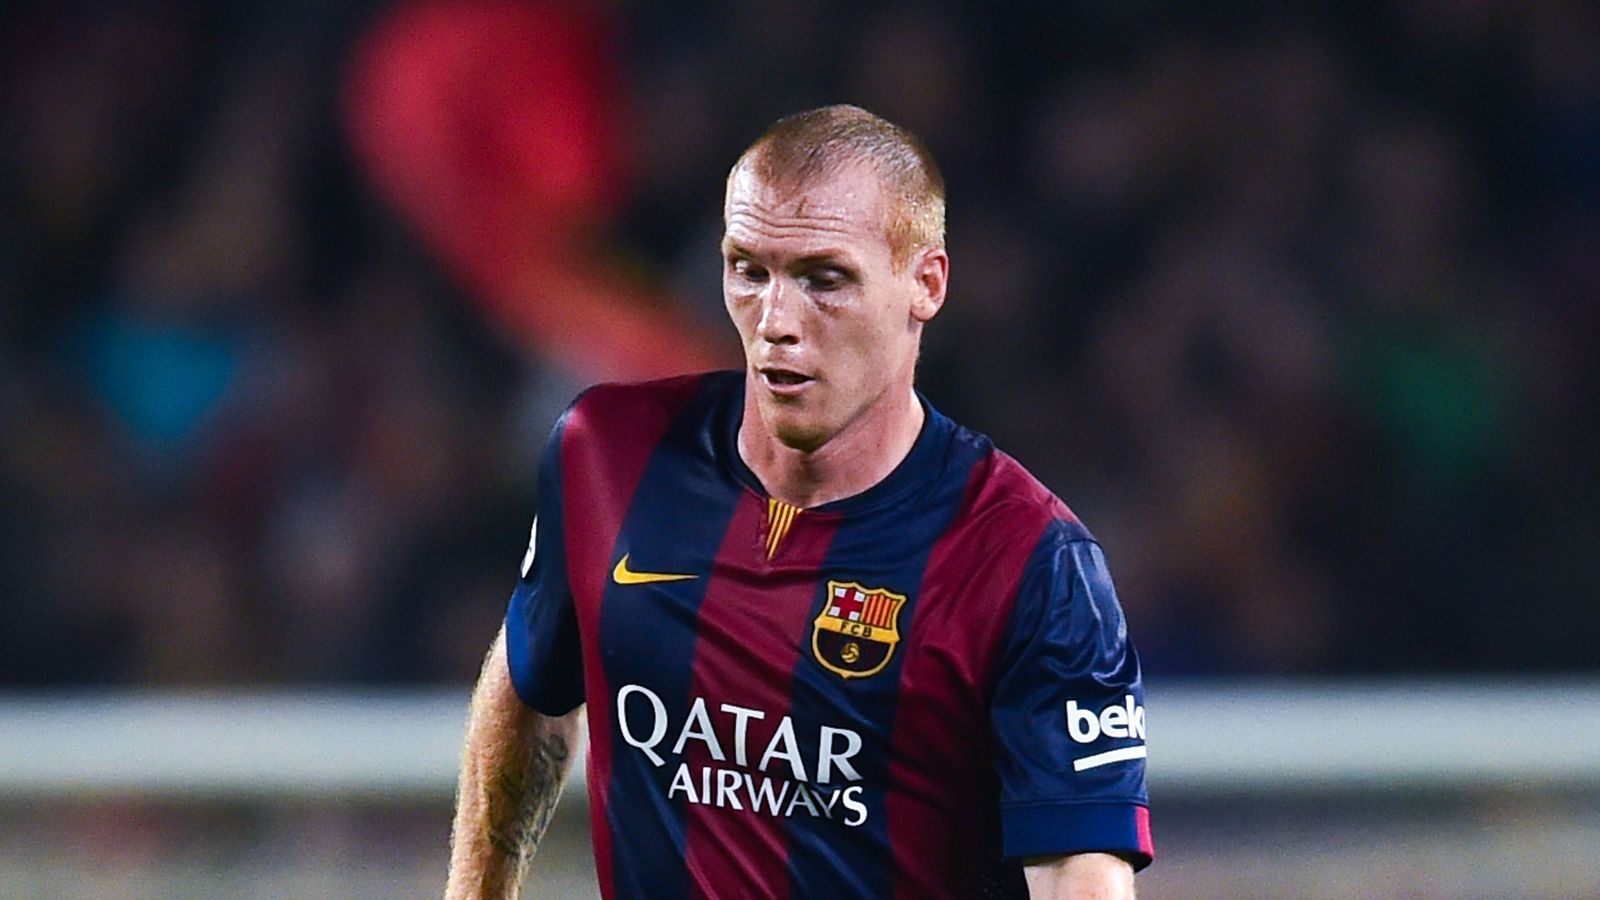 Jeremy Mathieu retired from football